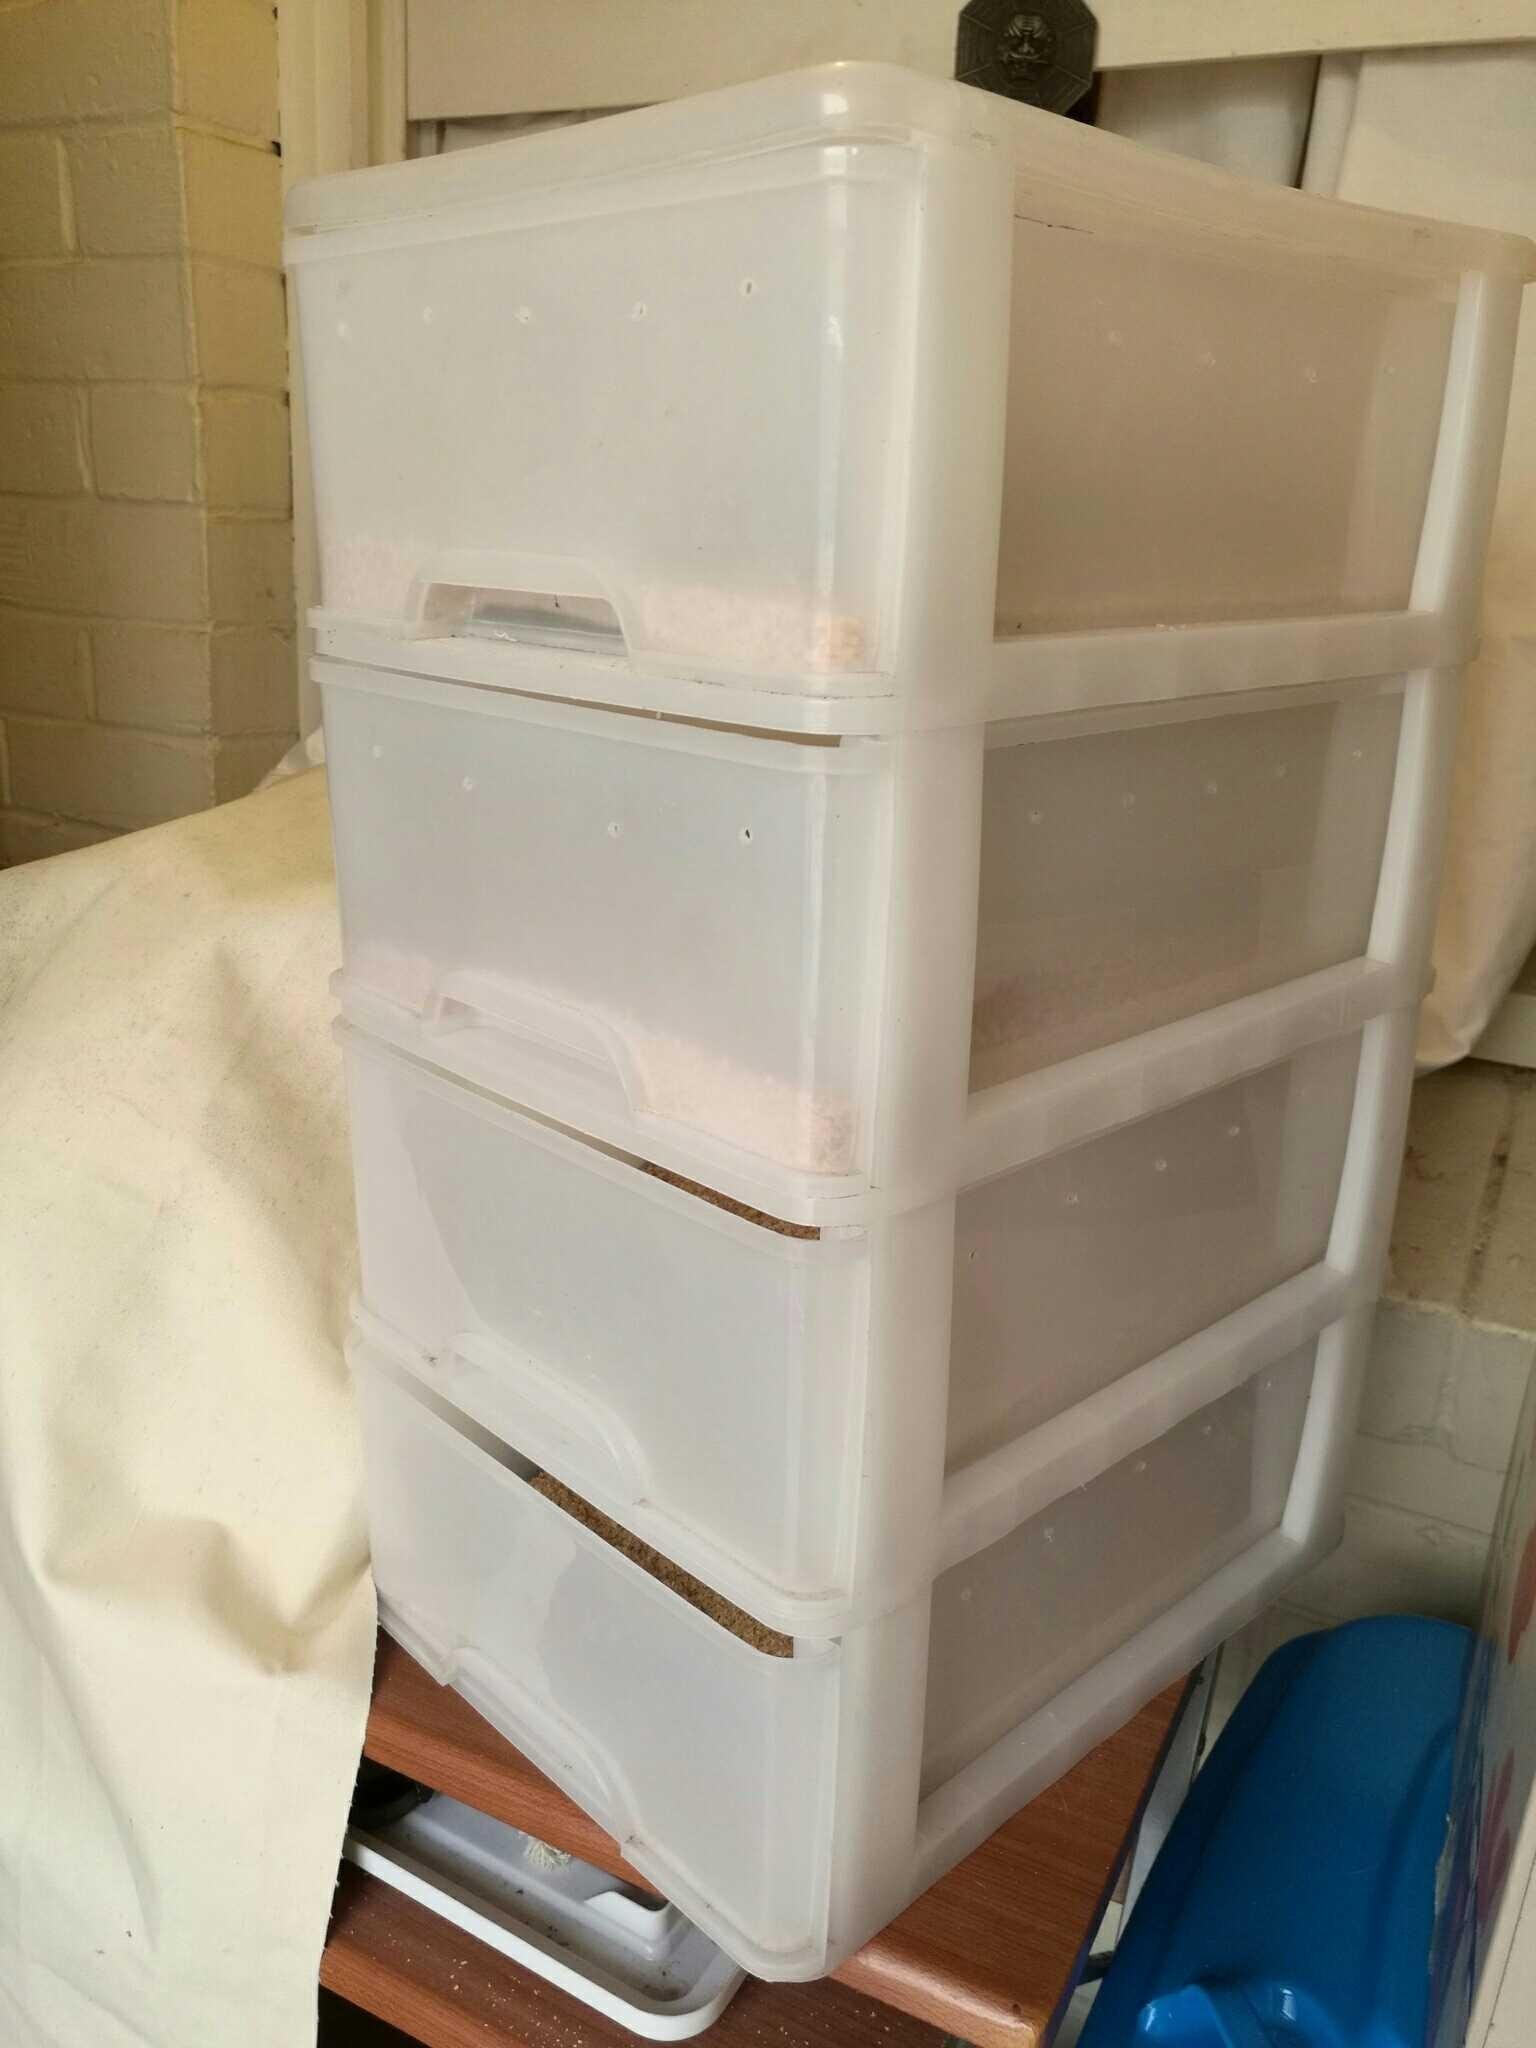 Cheap plastic drawers are all you need.